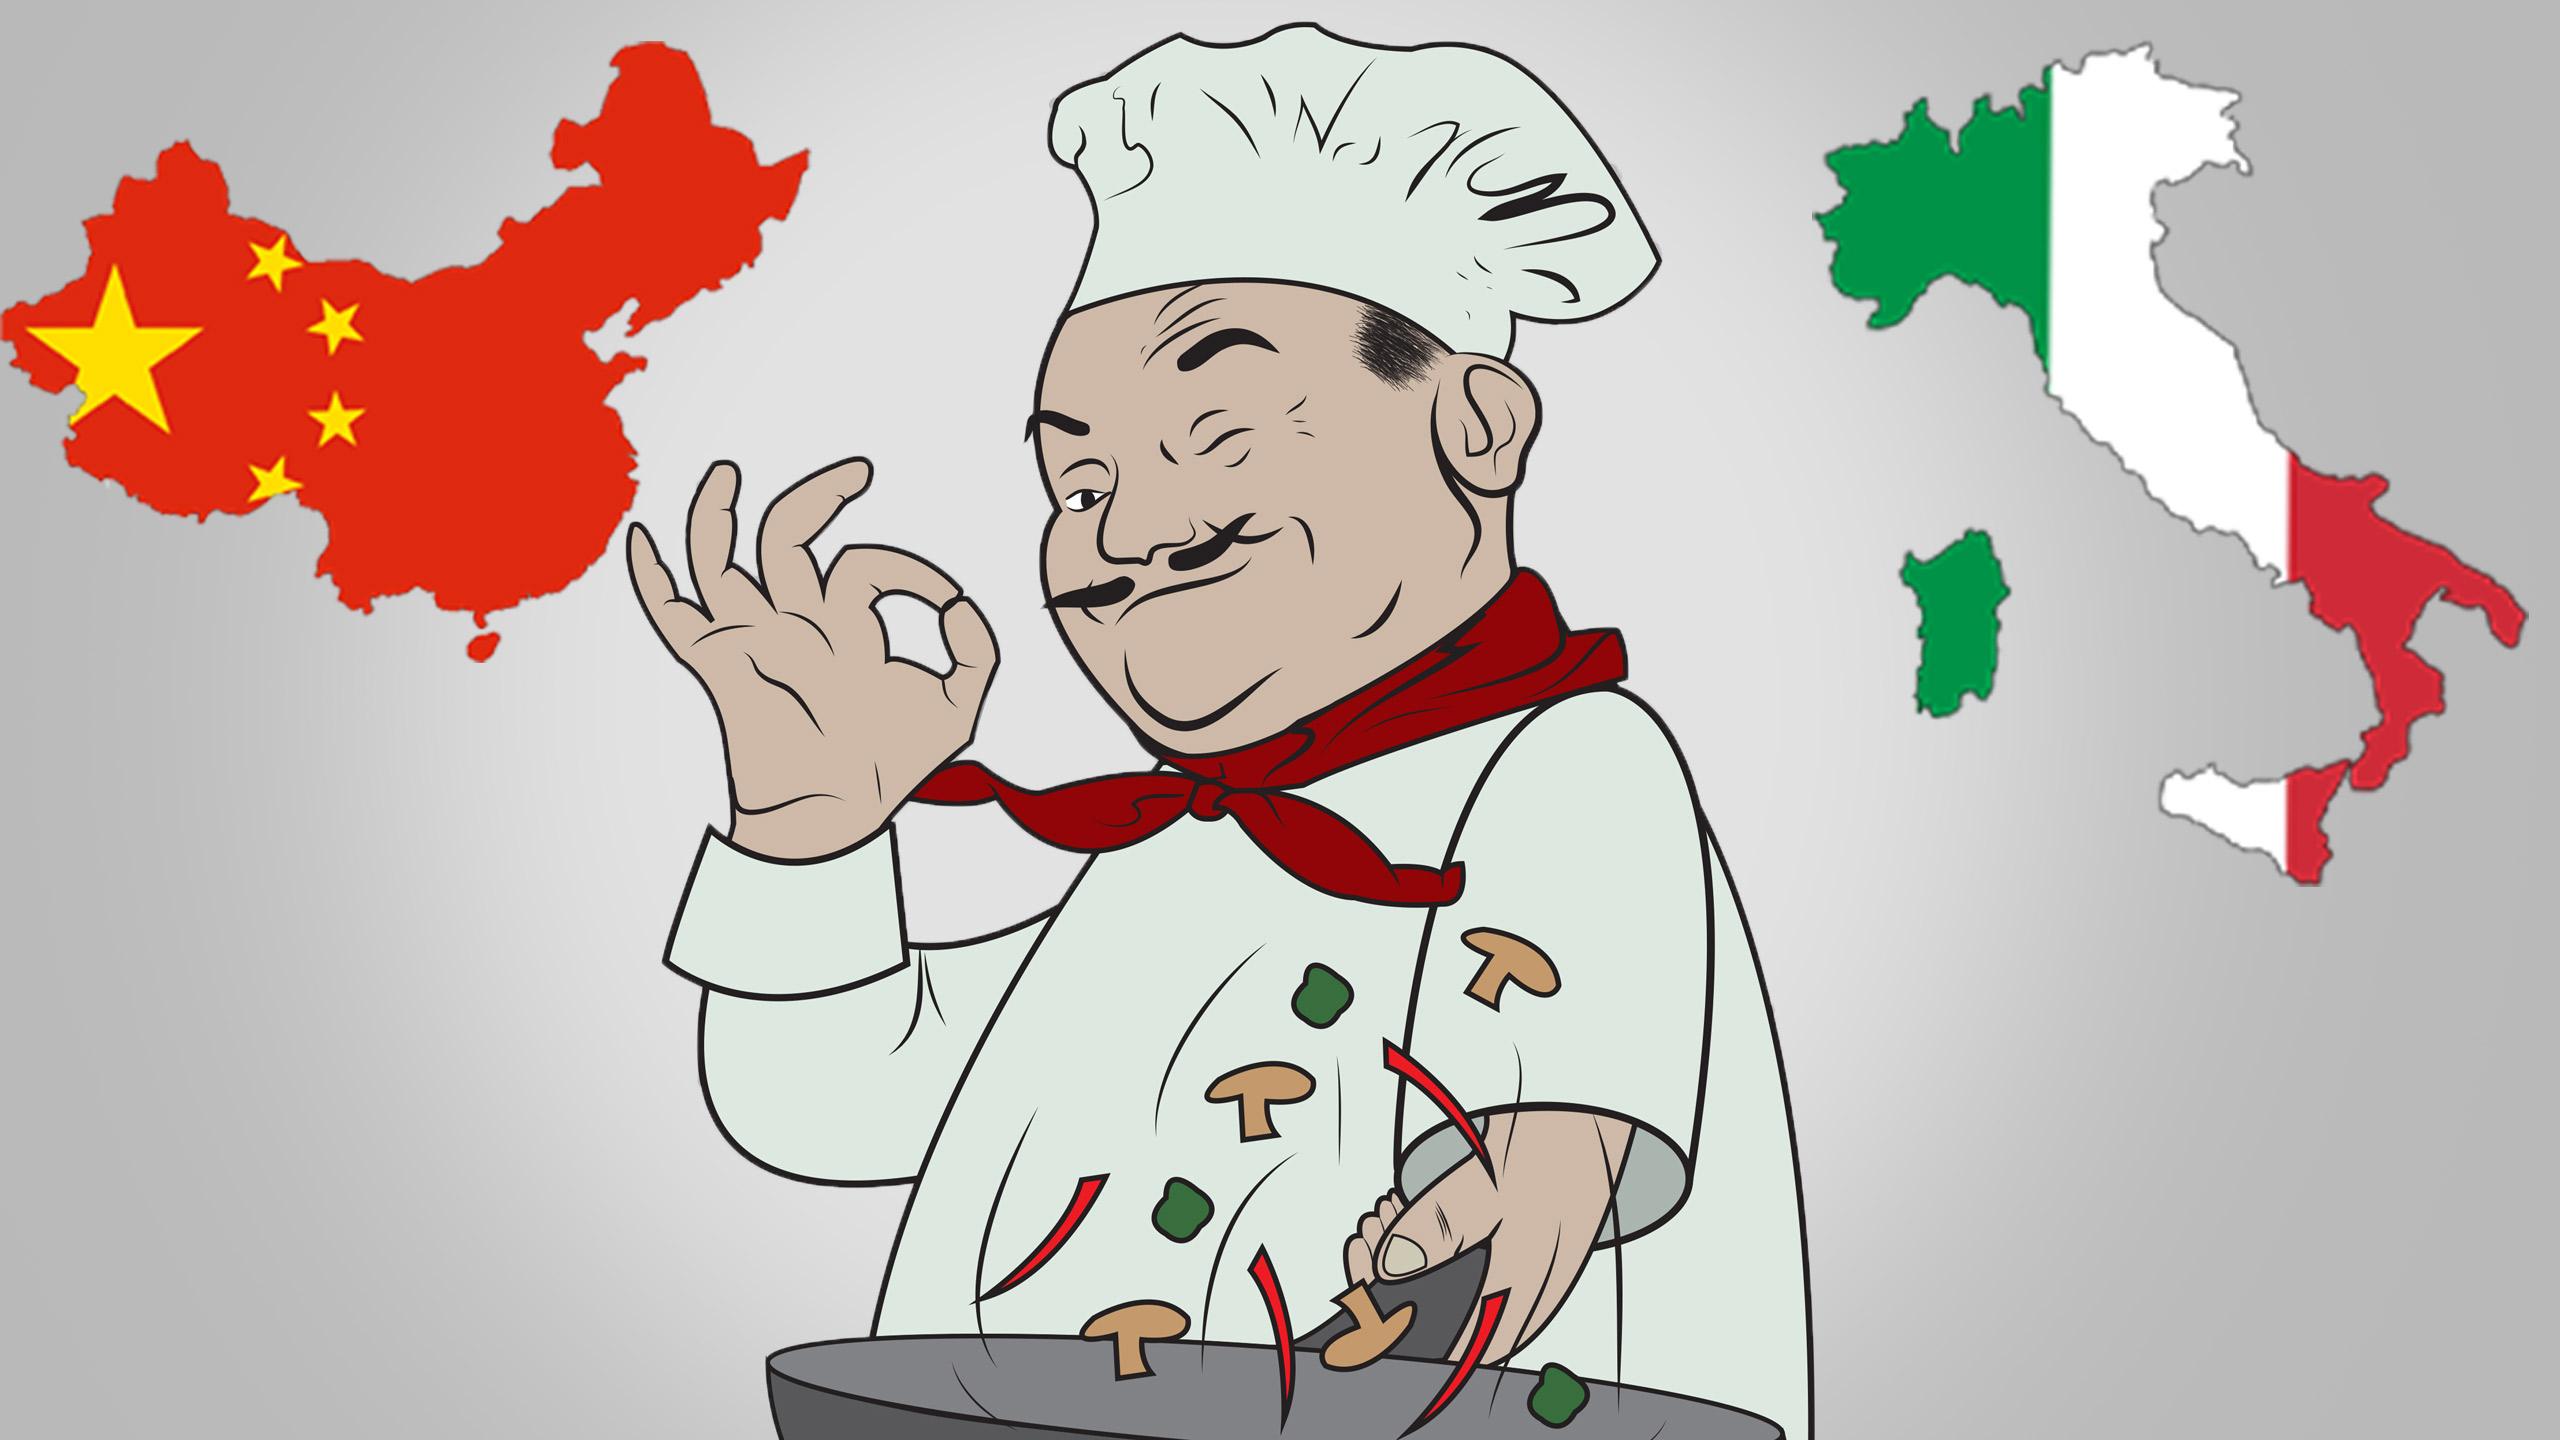 A chef stands in the middle with a pan of mushrooms and peppers. On either side of him are the flags for Italy and China